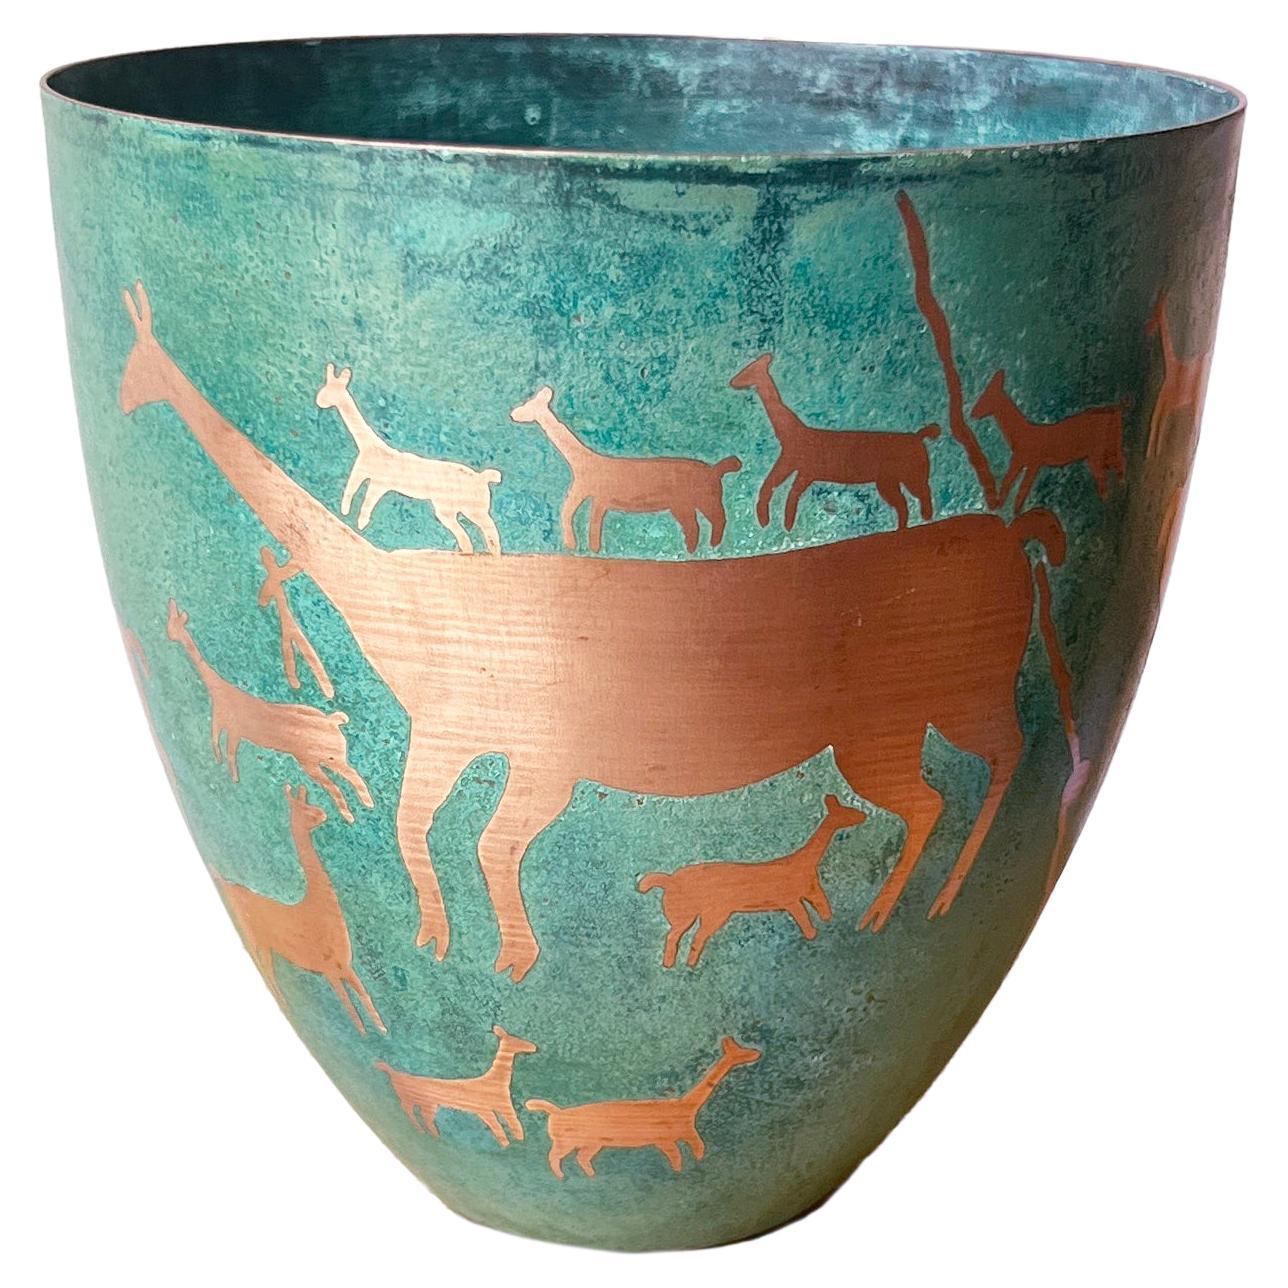 Llama Caravan Oxidized Copper Vessel, Handmade and Etched with Animal Figures